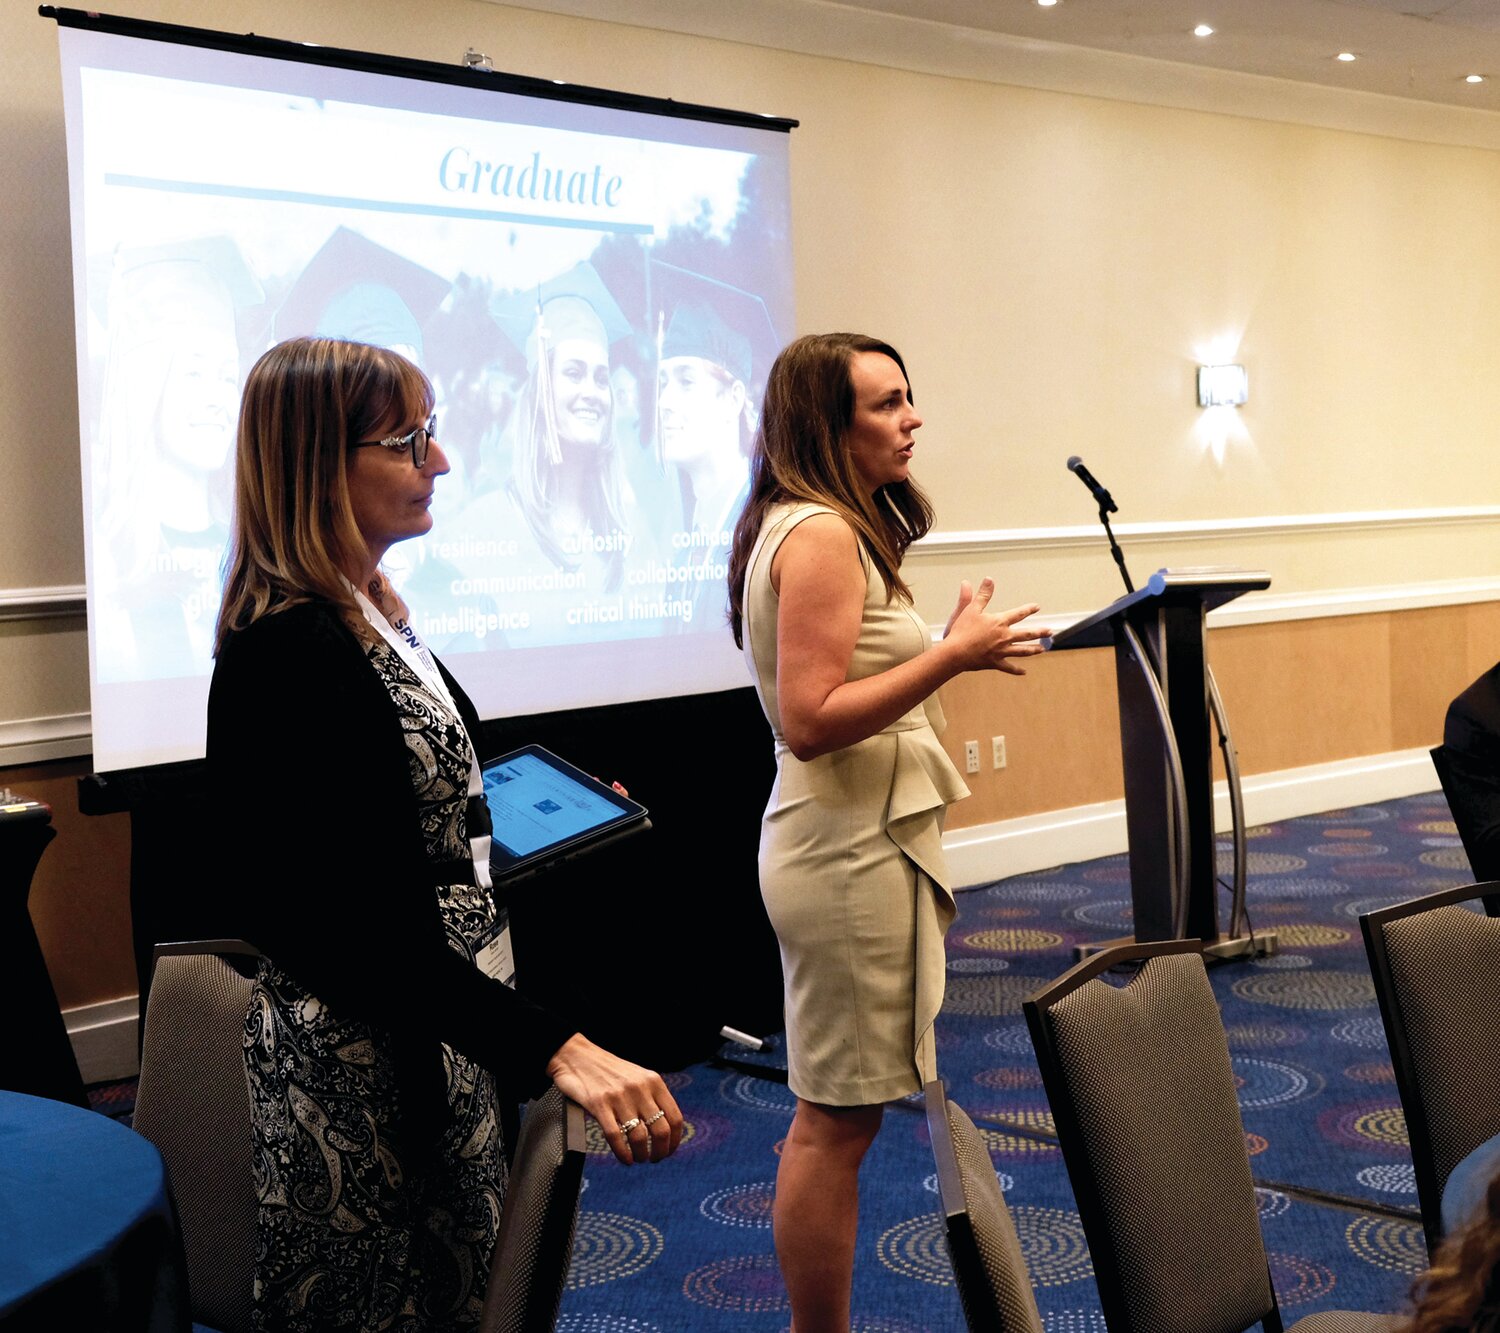 New Hope-Solebury School District Assistant Superintendent Dr. Rose Minniti and Director of Education Amanda Benolken discuss the STEAM facility renovation and curriculum development during the American Association of School Administrators’ (AASA) Learning 2025 Summit.